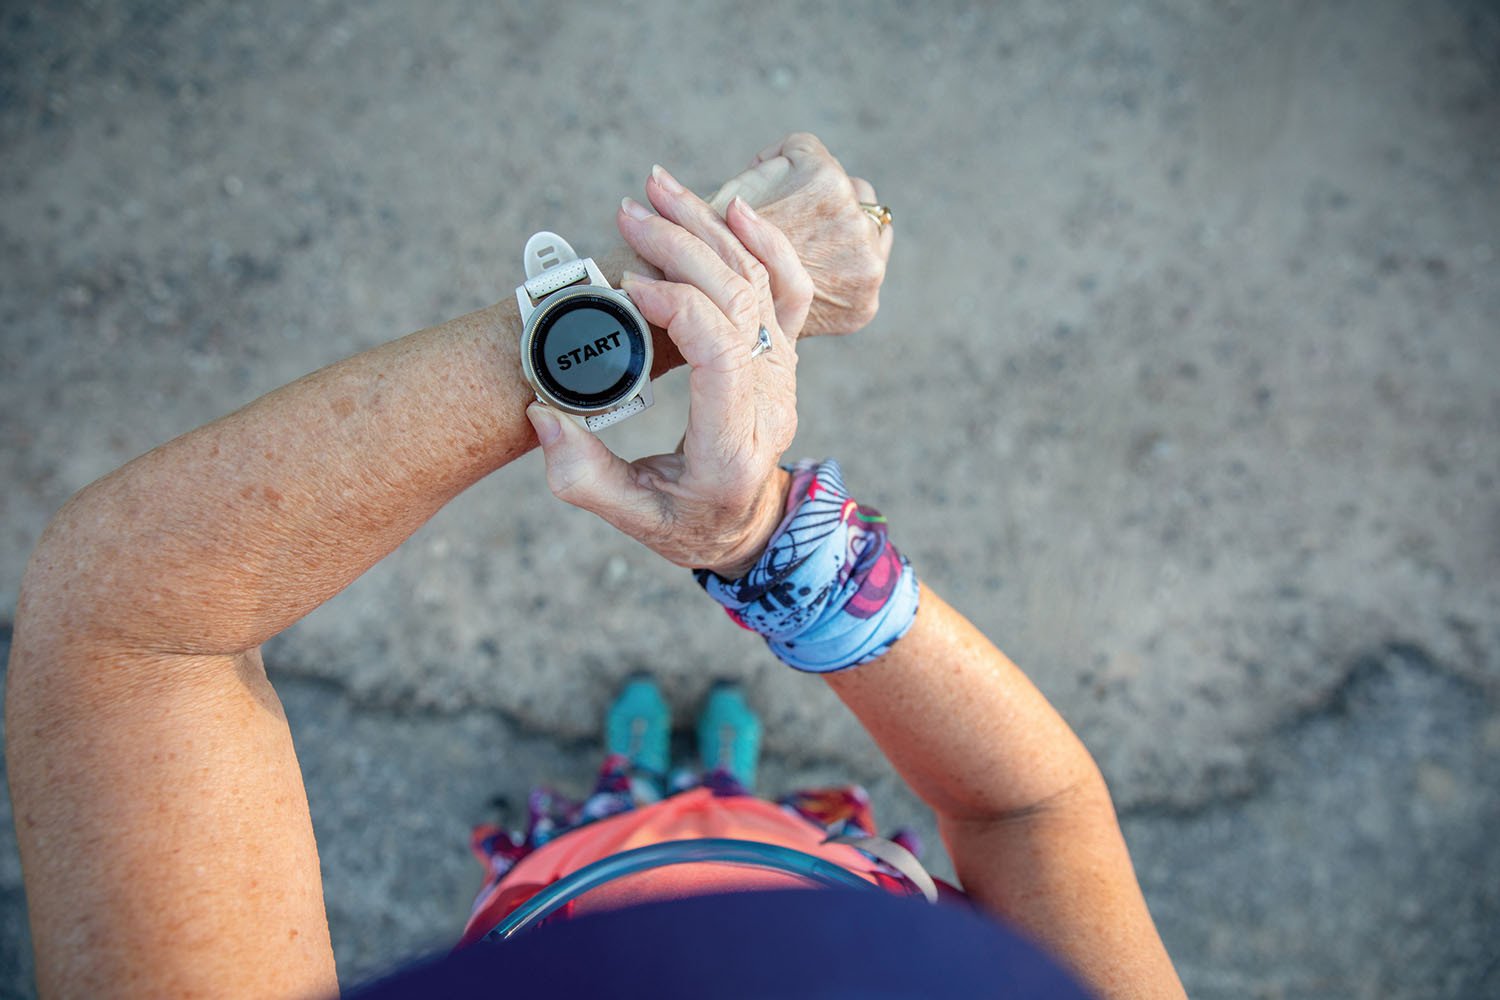 An individual preparing to start their workout routine, checking the 'START' button on their fitness watch, symbolizing the role of technology in active lifestyles.